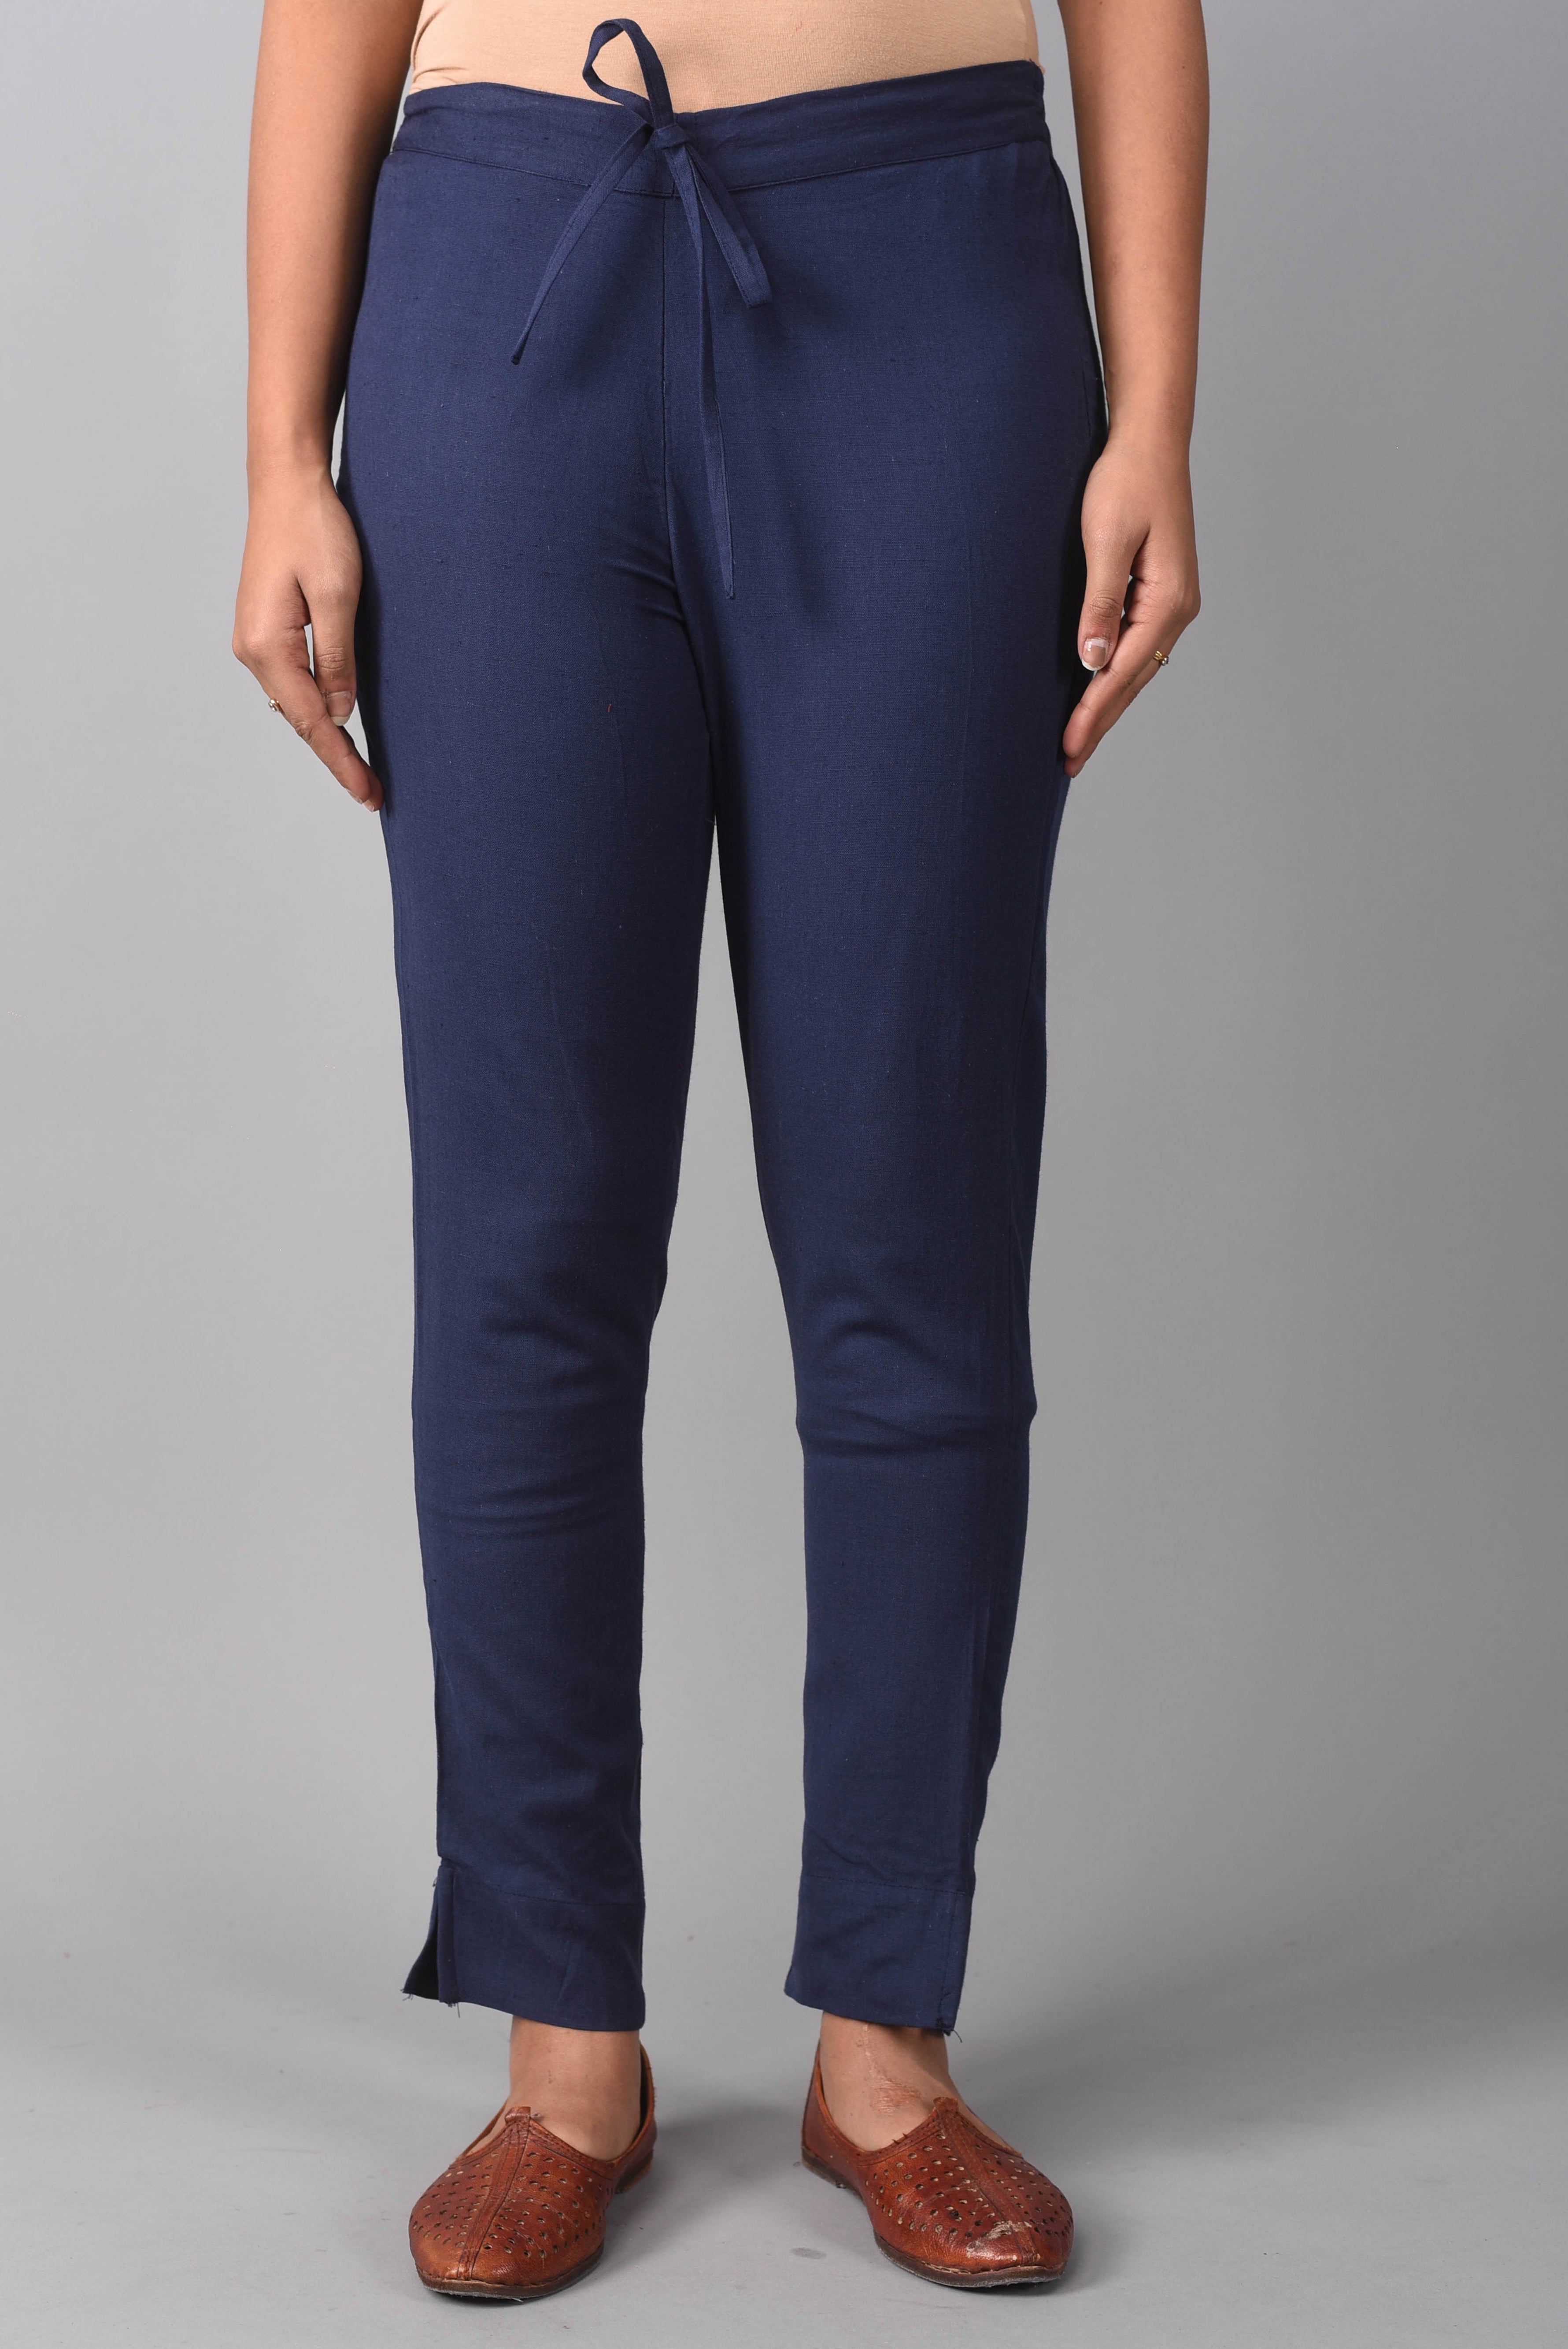 Buy Navy Blue Solid Cotton Trousers Online at Rs.628 | Libas